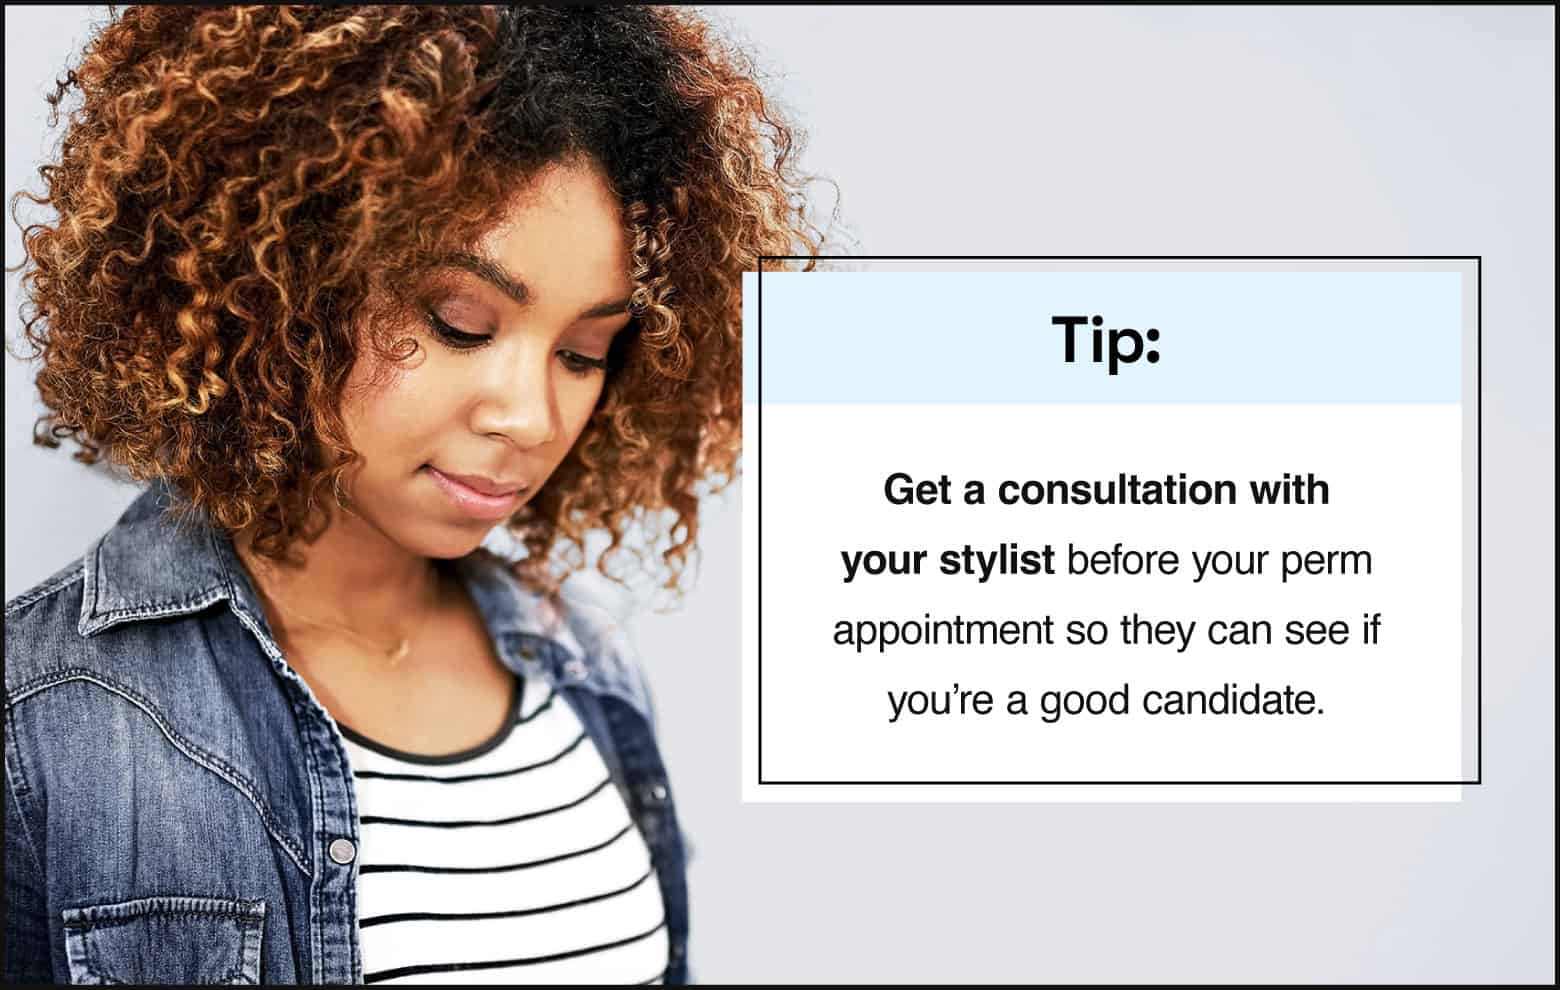 person with brown curly hair wearing a denim jacket and striped shirt, graphic tip explaining a person should get a stylist consultation to see if they’re a good candidate for a perm